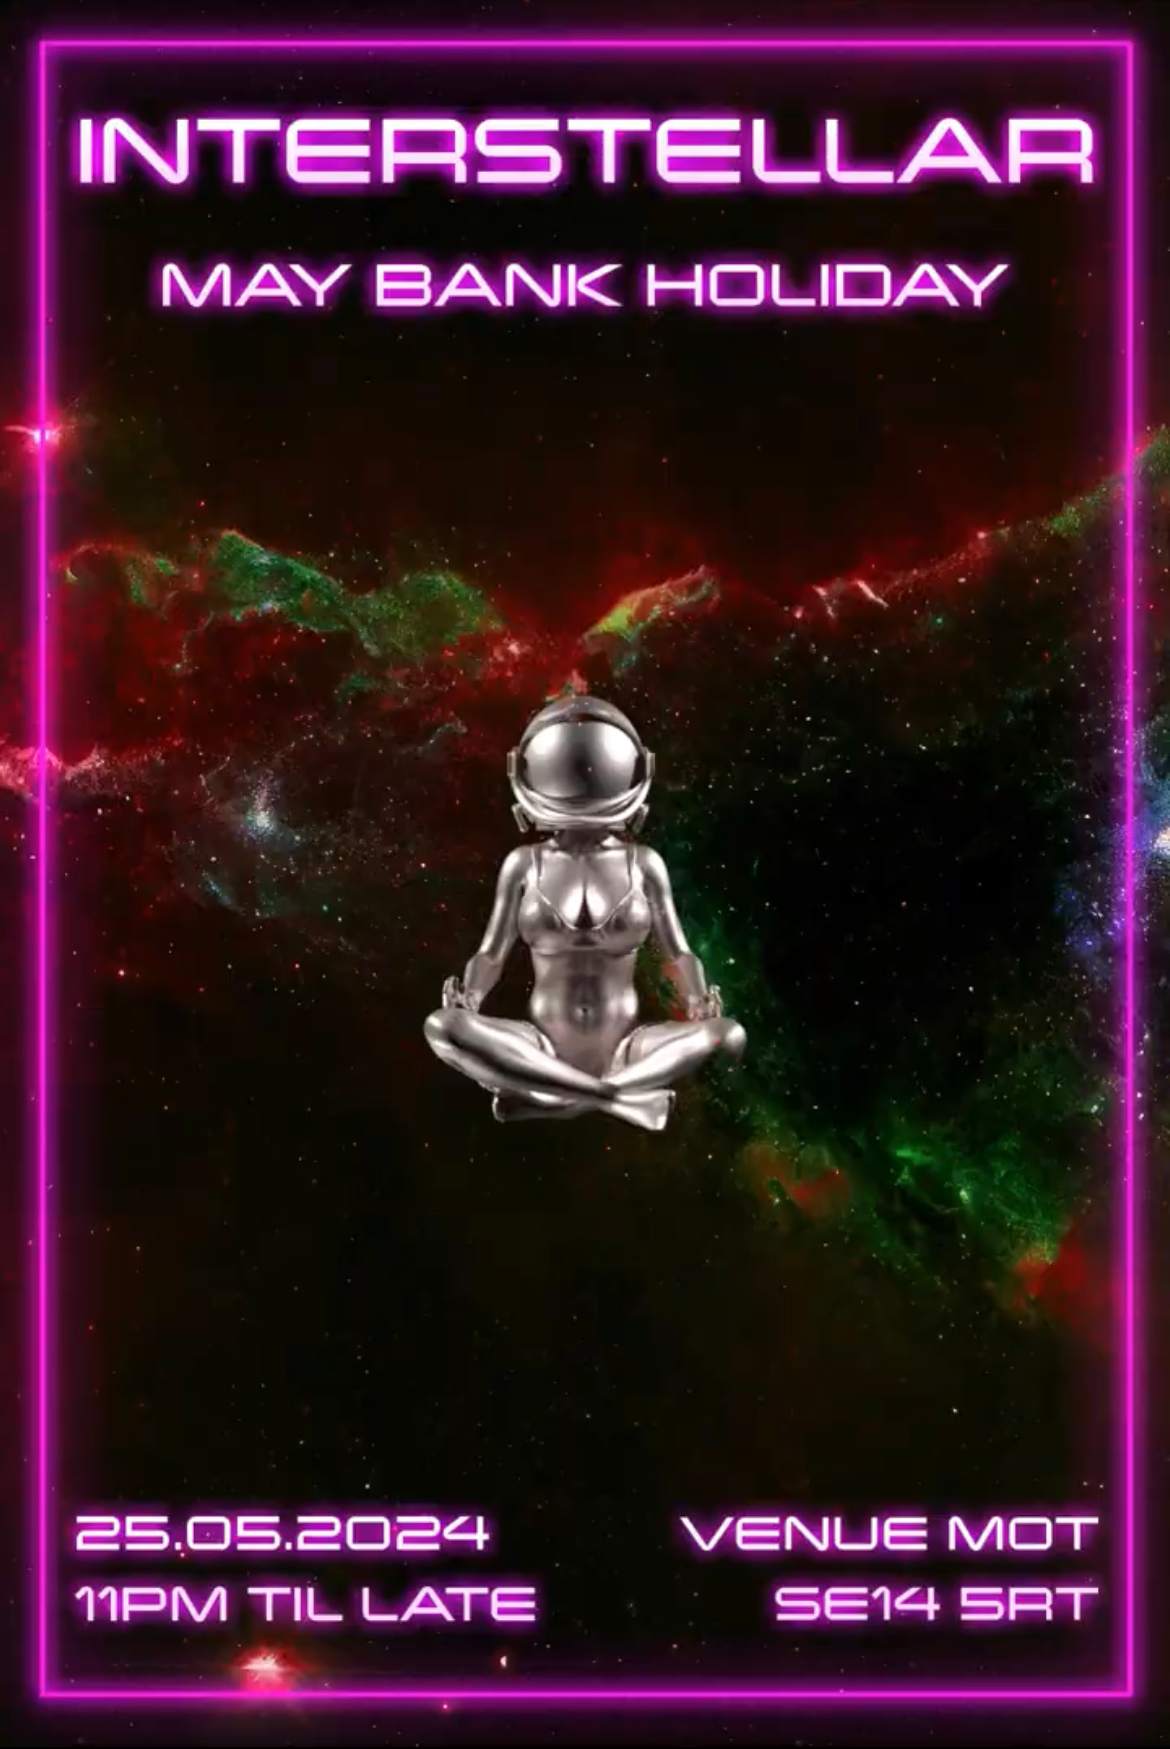 Interstellar May Bank Holiday: (POSTPONED BY 1 NIGHT DUE TO TECHNICAL ISSUES AT THE CLUB) - フライヤー表